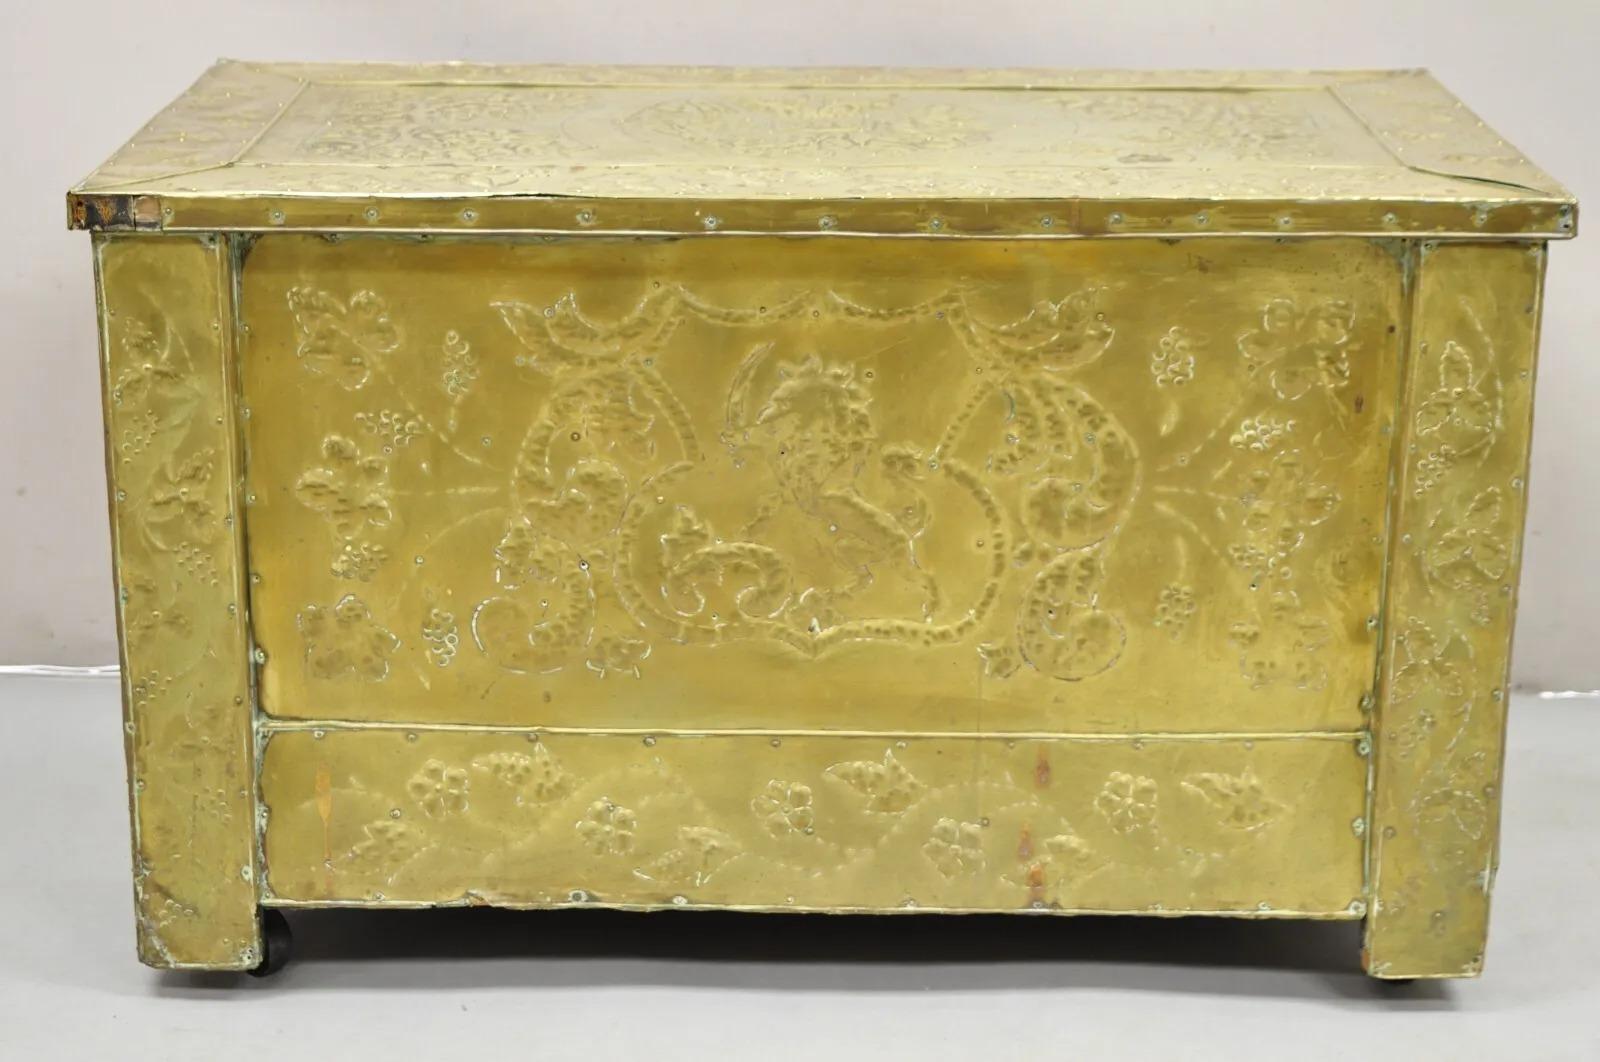 Antique English Victorian Figural Brass Clad Wooden Blanket Chest Storage Trunk In Good Condition For Sale In Philadelphia, PA